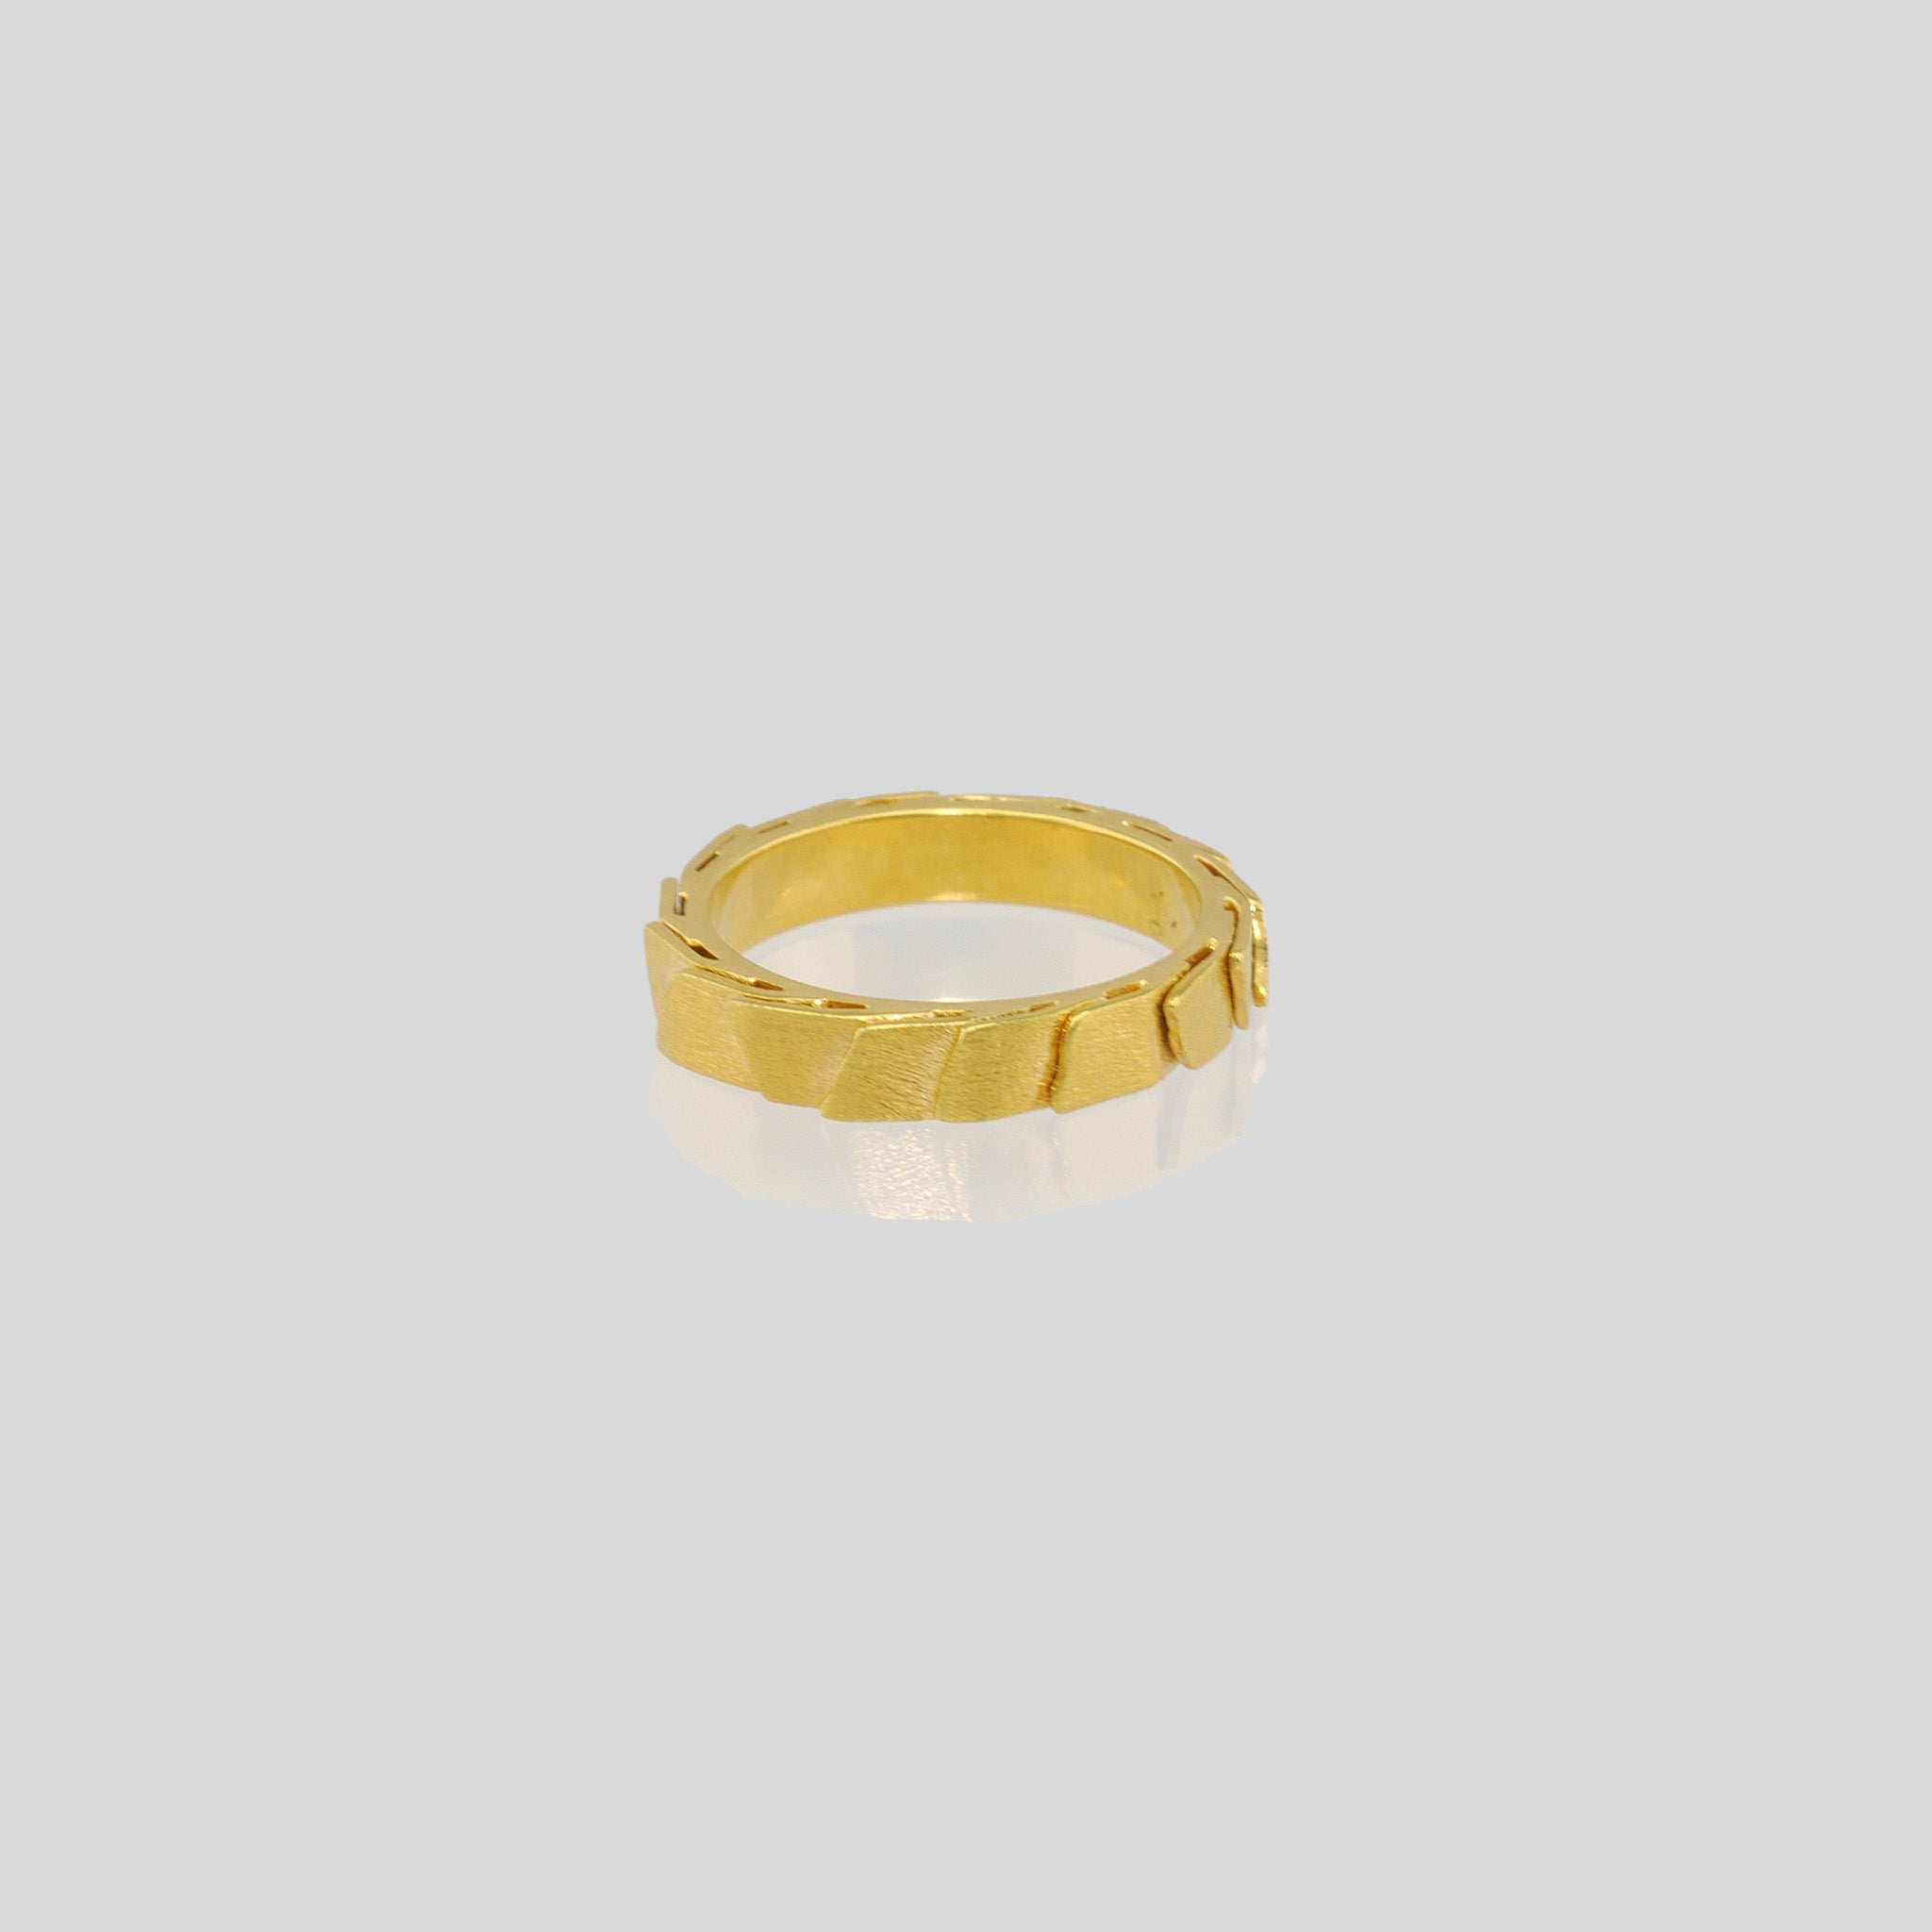 A captivating gold ring adorned with overlapping layers, evoking a sense of continuous motion and embrace. The inner surface is smooth, for optimal comfort.